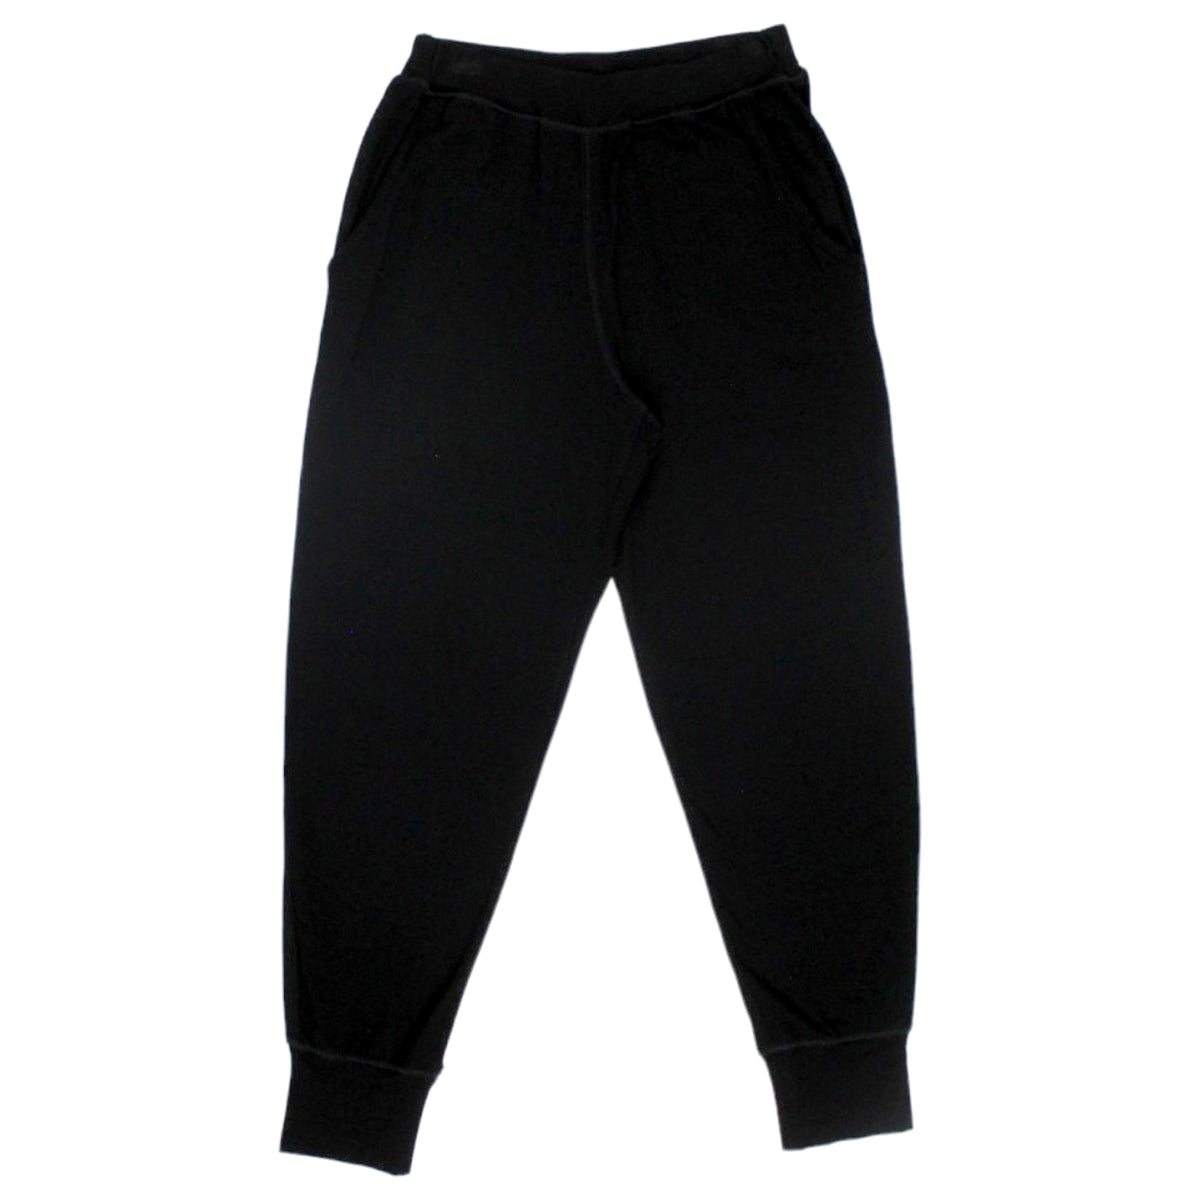 NRBY Black Jersey Joggers